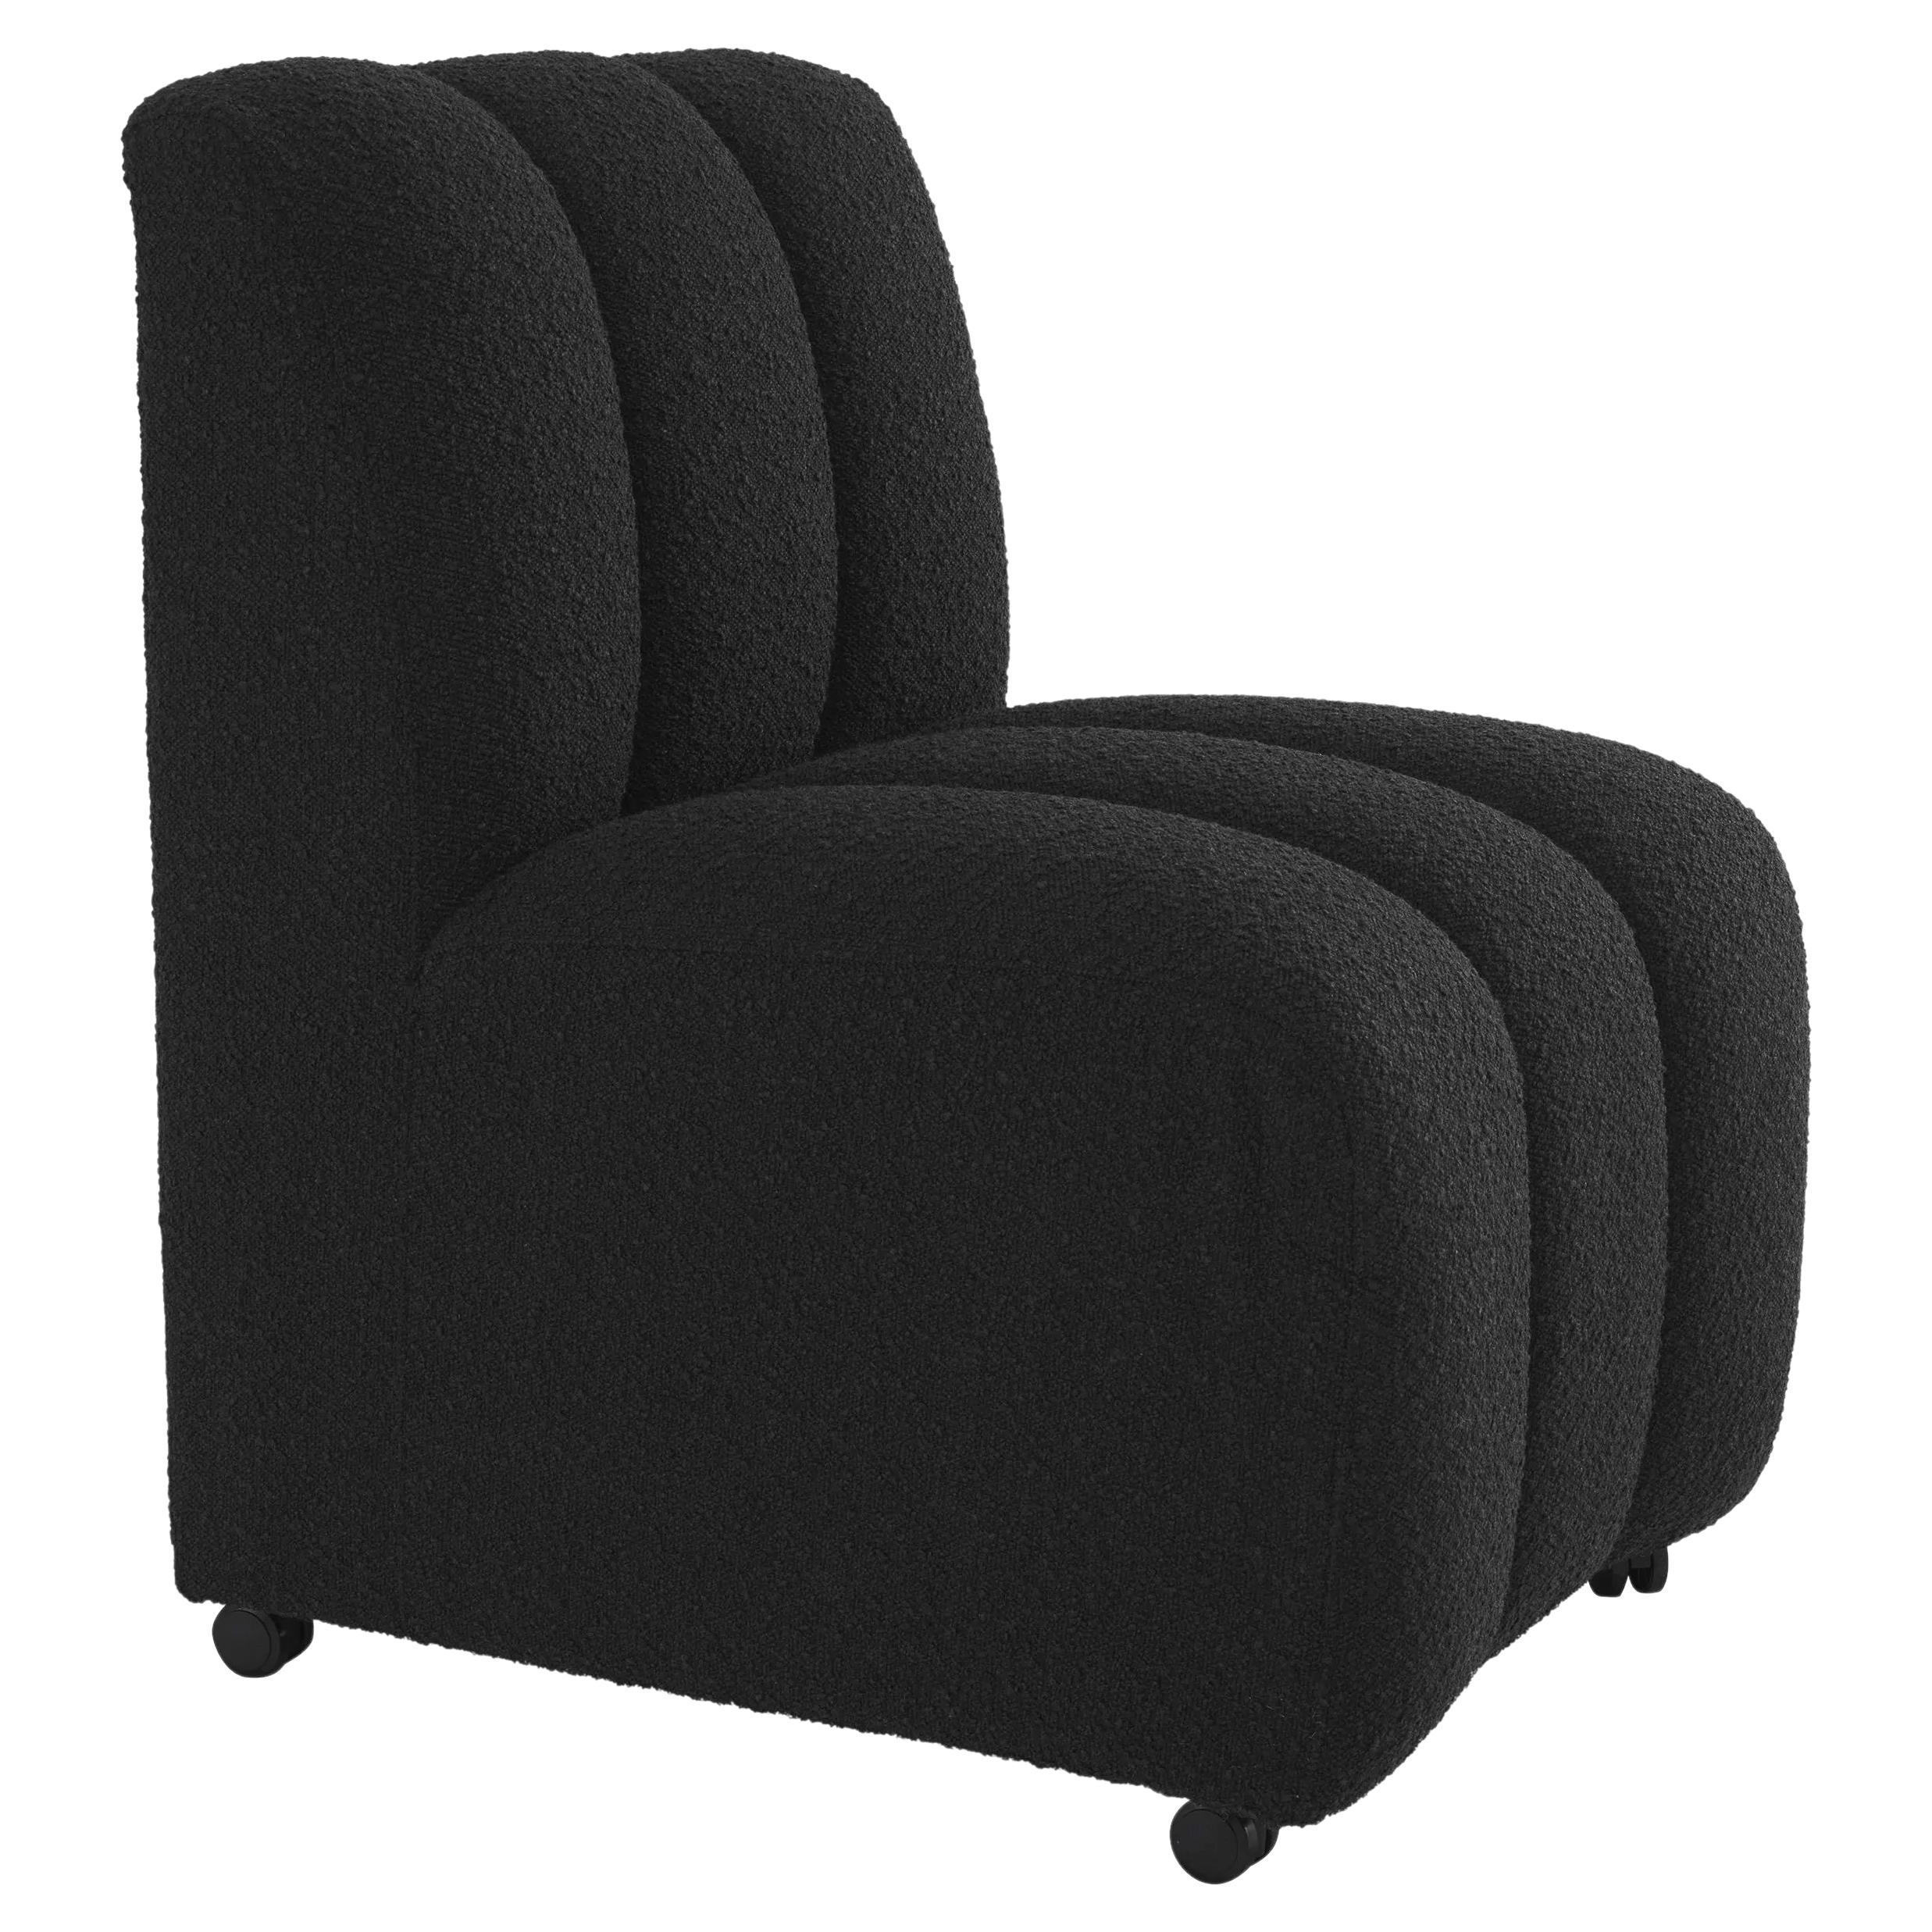 1960s Italian Design Style All in Black Bouclé Fabric Dining Chair For Sale